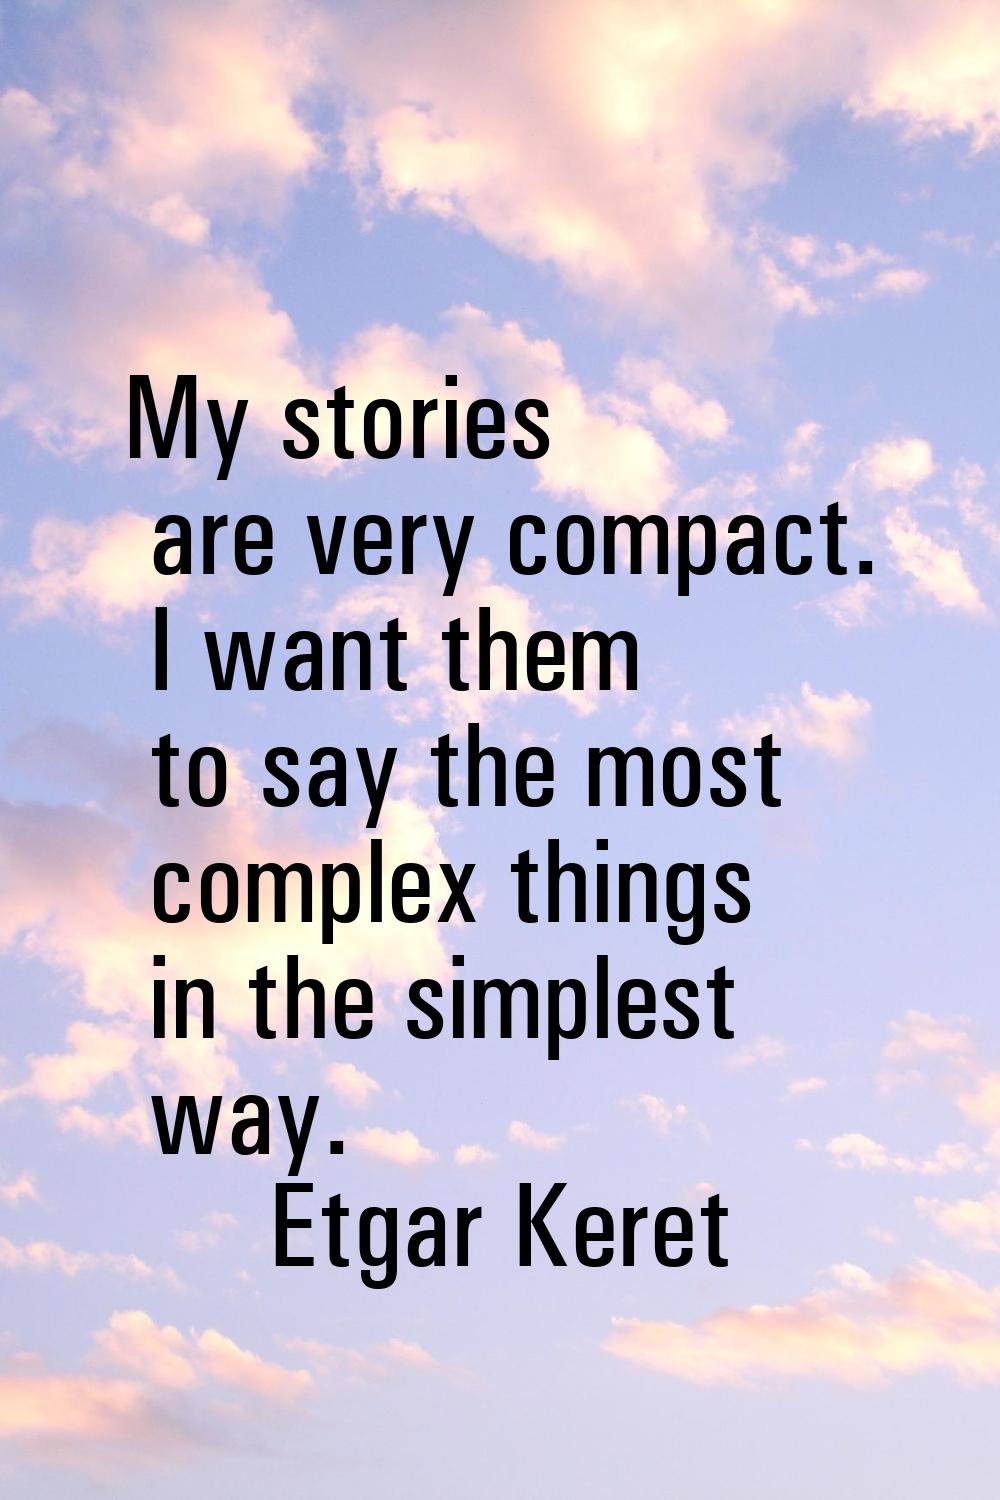 My stories are very compact. I want them to say the most complex things in the simplest way.